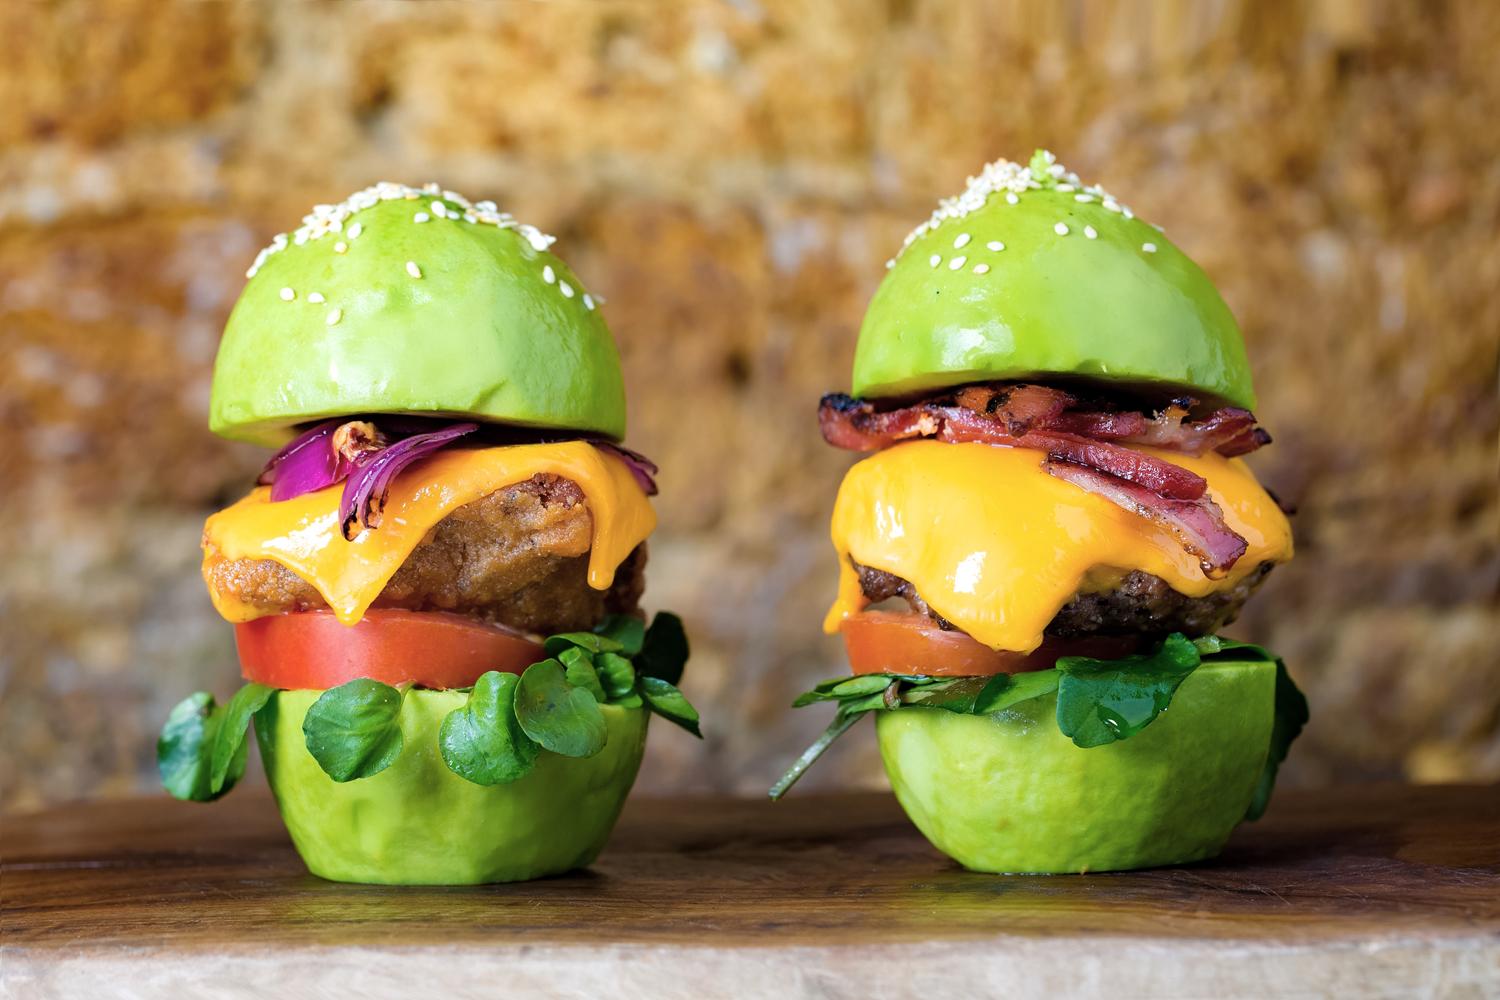 Can We Guess Your Age Based on Your Hipster Food Choices? Avocado burgers